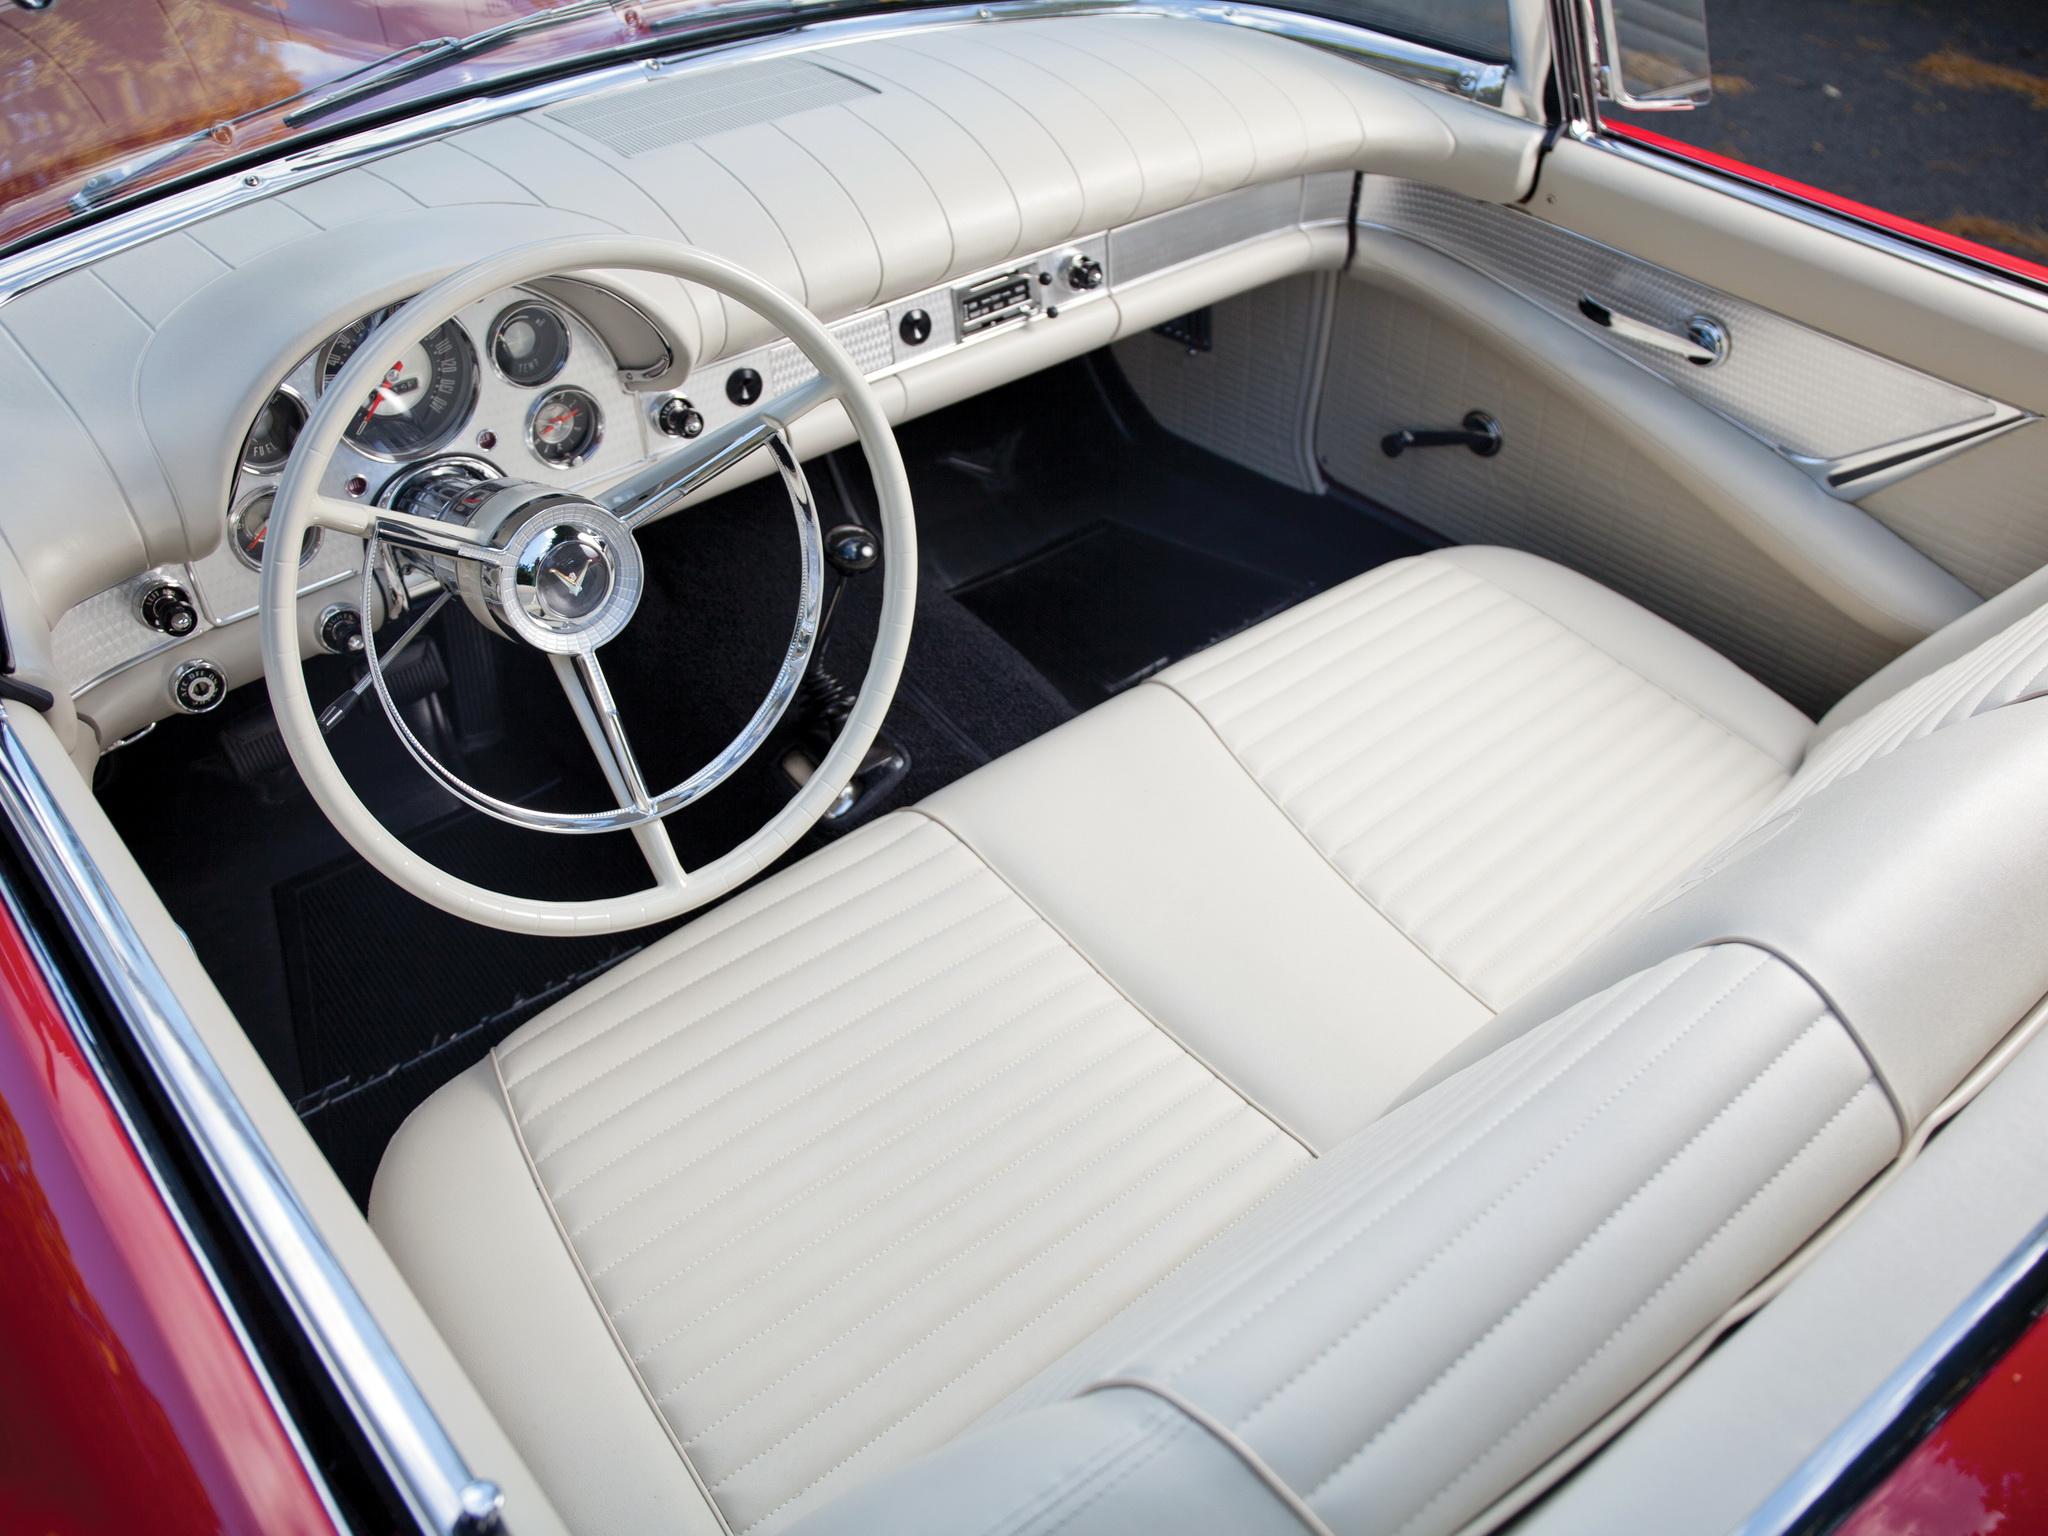 1957, Ford, Thunderbird, Special, Supercharged, 312, 300hp,  40a , Retro, Muscle, Supercar, Interior Wallpaper